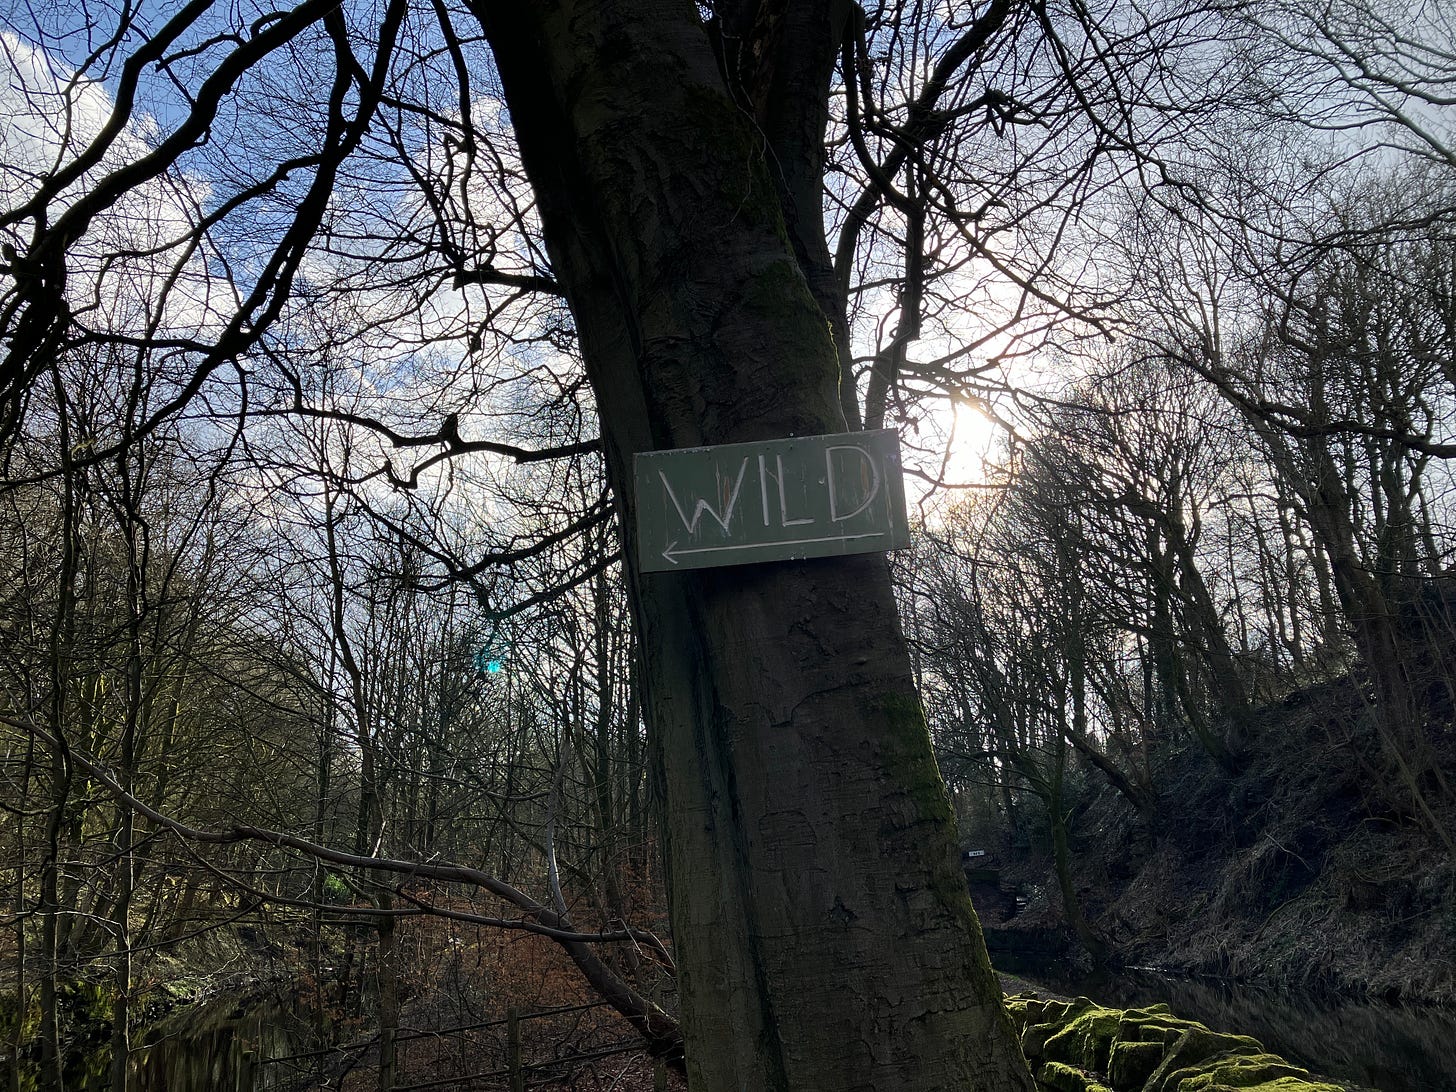 Tree silhouetted against a cloudy blue skie with a sign saying wild on it